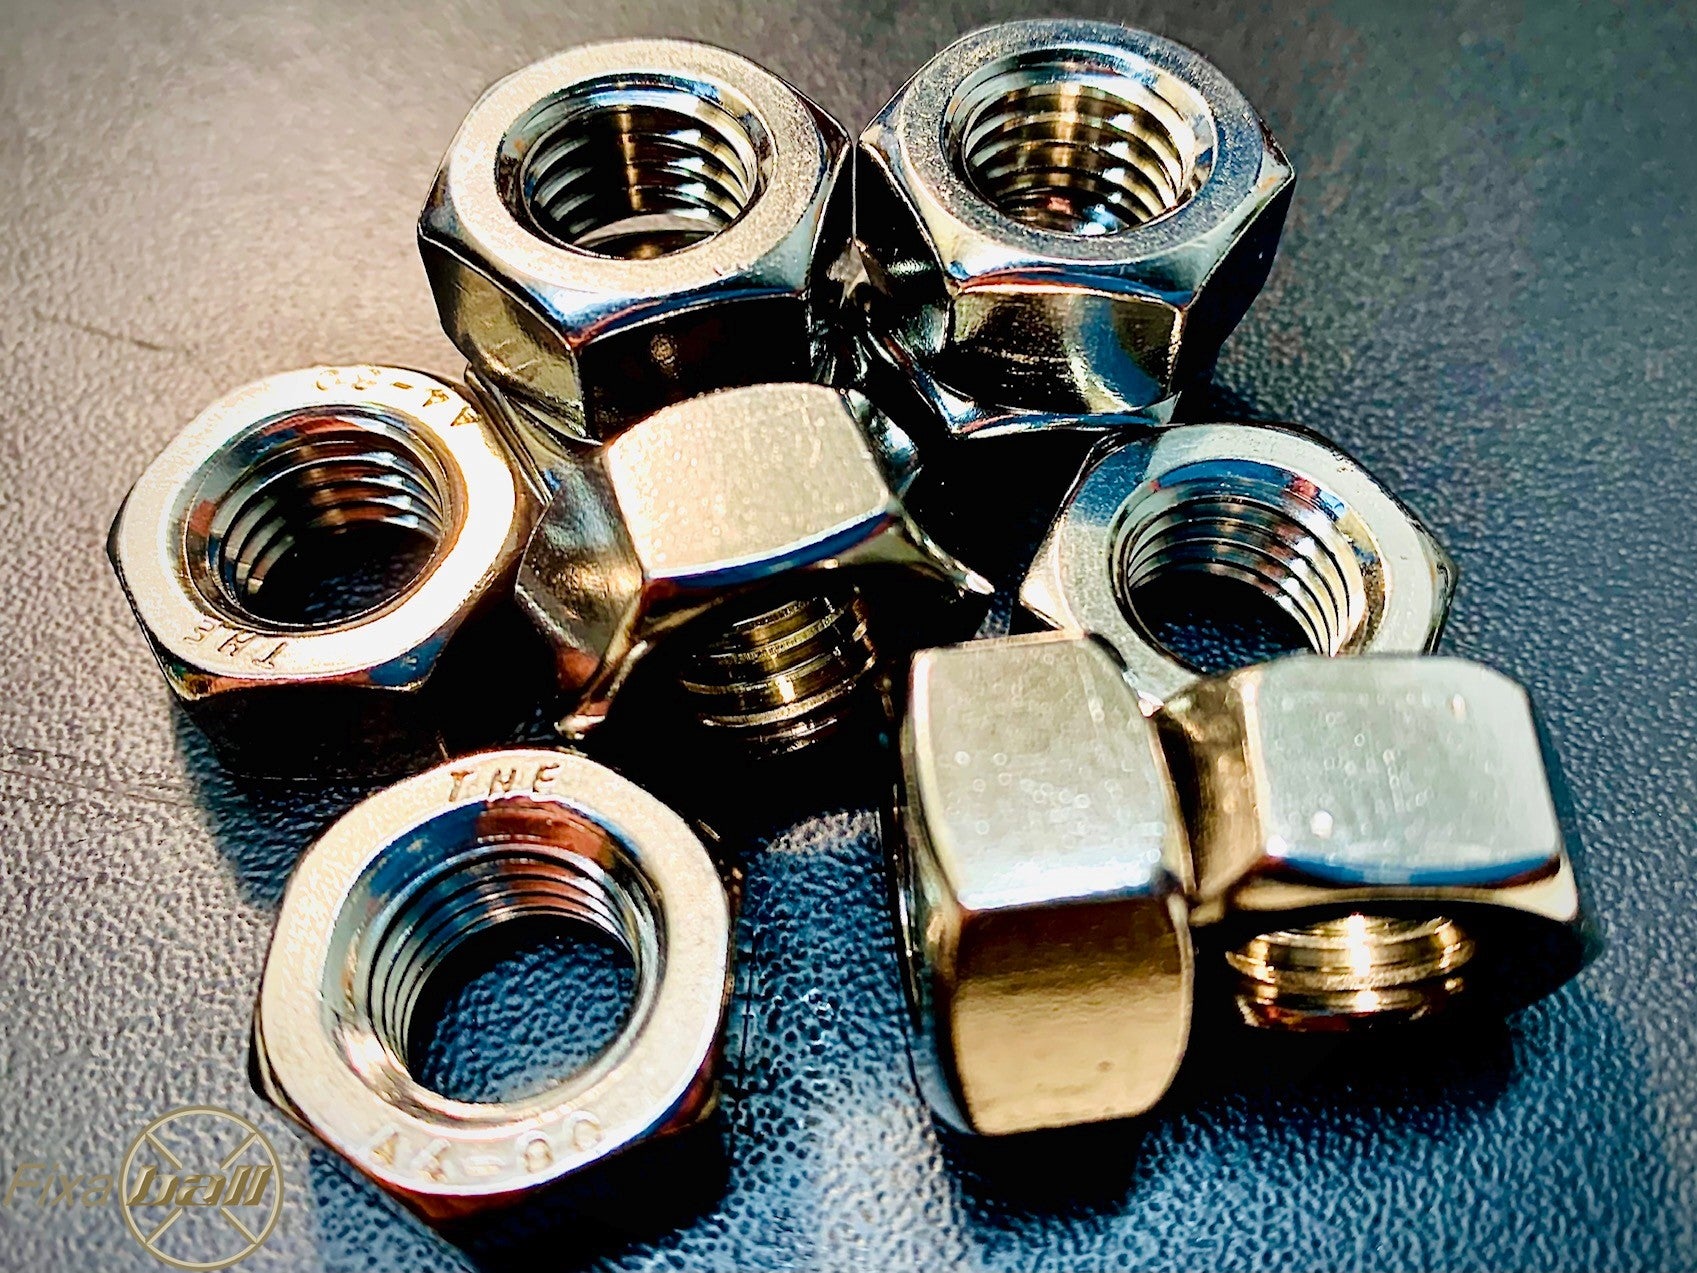 M3 - M12, Full Hex Nuts, A4/ 316 Stainless Steel, DIN 934. Nuts M3 - M12, Full Hex Nuts, A4/ 316 Stainless Steel, DIN 934. Full Nuts